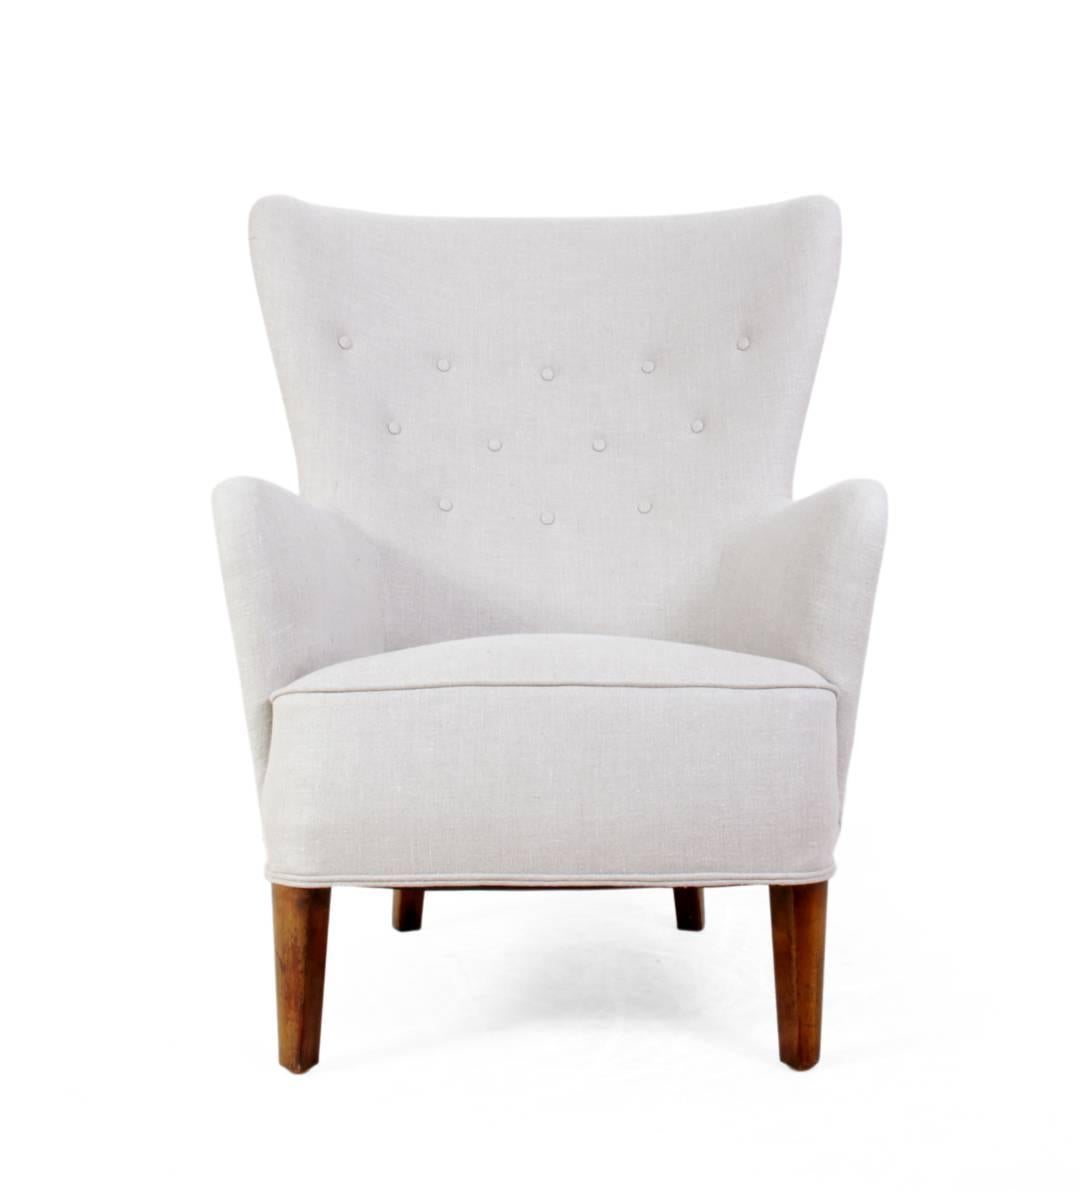 Danish wing chair, circa 1940.
A very high quality fully coil sprung, wing chair. Re-upholstered in heavy weight linen upholstery fabric, solid hard wood frame, webbed and sprung with horse hair filling, buttoned curved back and piped detail.
Age: